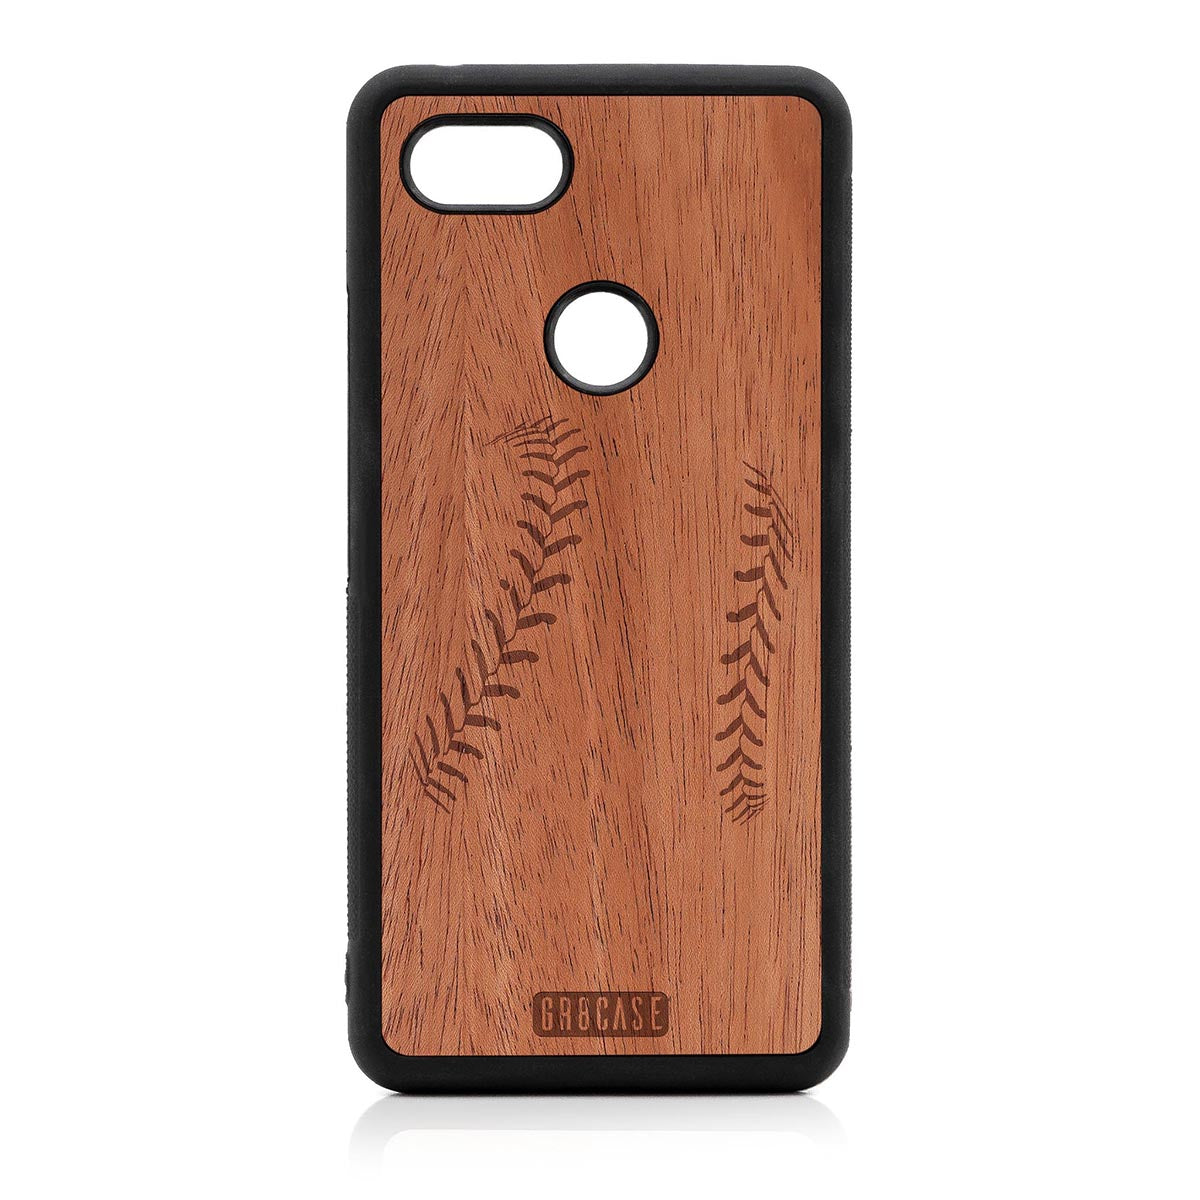 Baseball Stitches Design Wood Case For Google Pixel 3 XL by GR8CASE